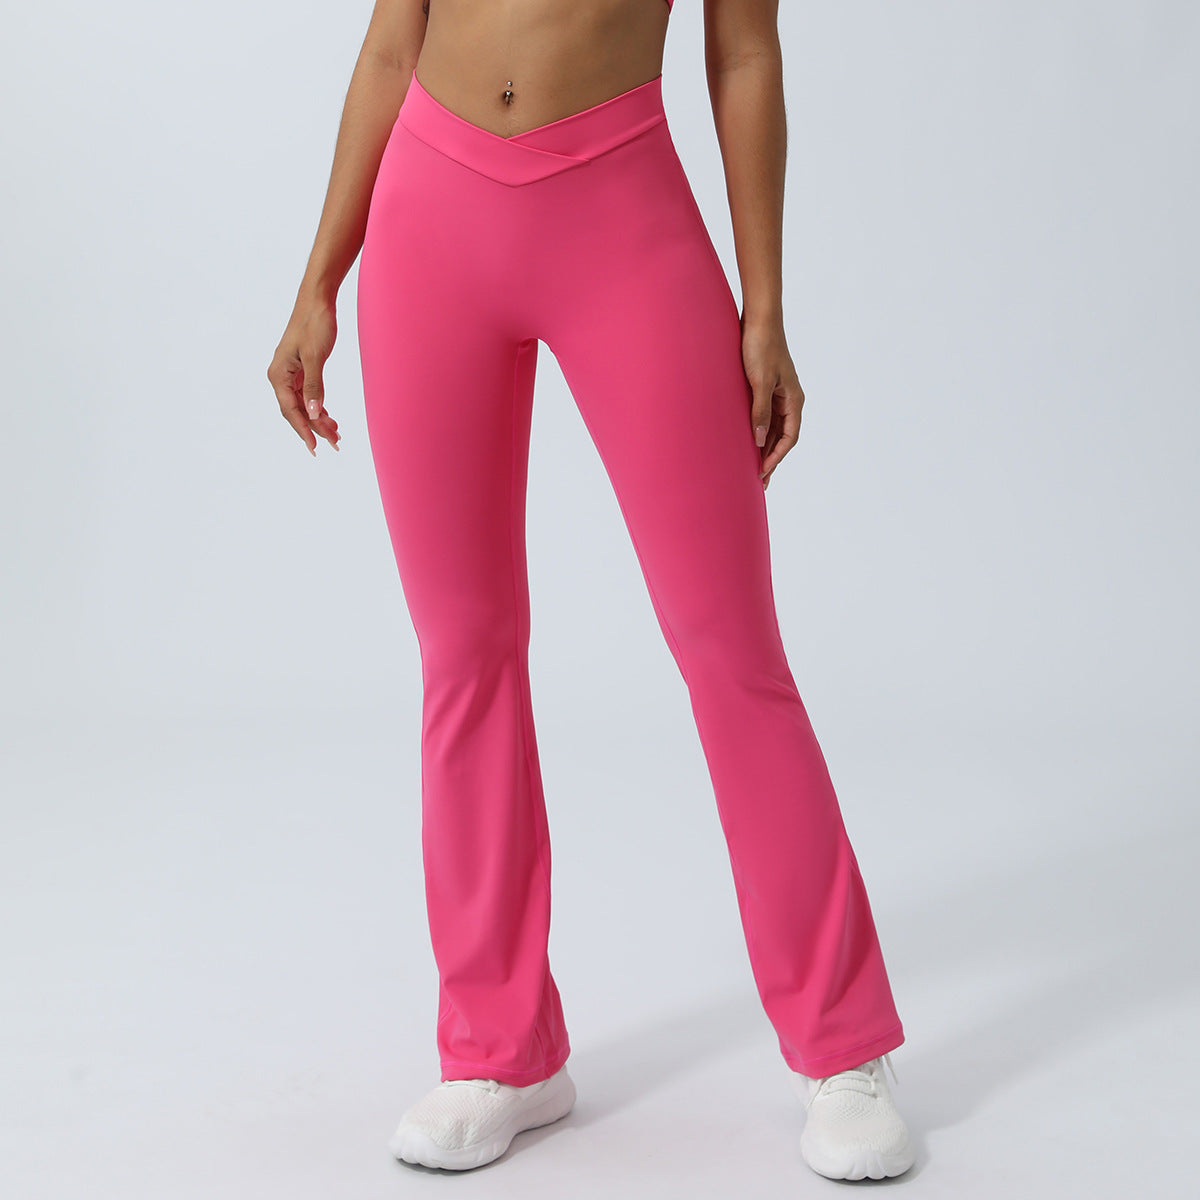 Cross V-shape fitness Flare shrink peach without T-line quick dry 4colors